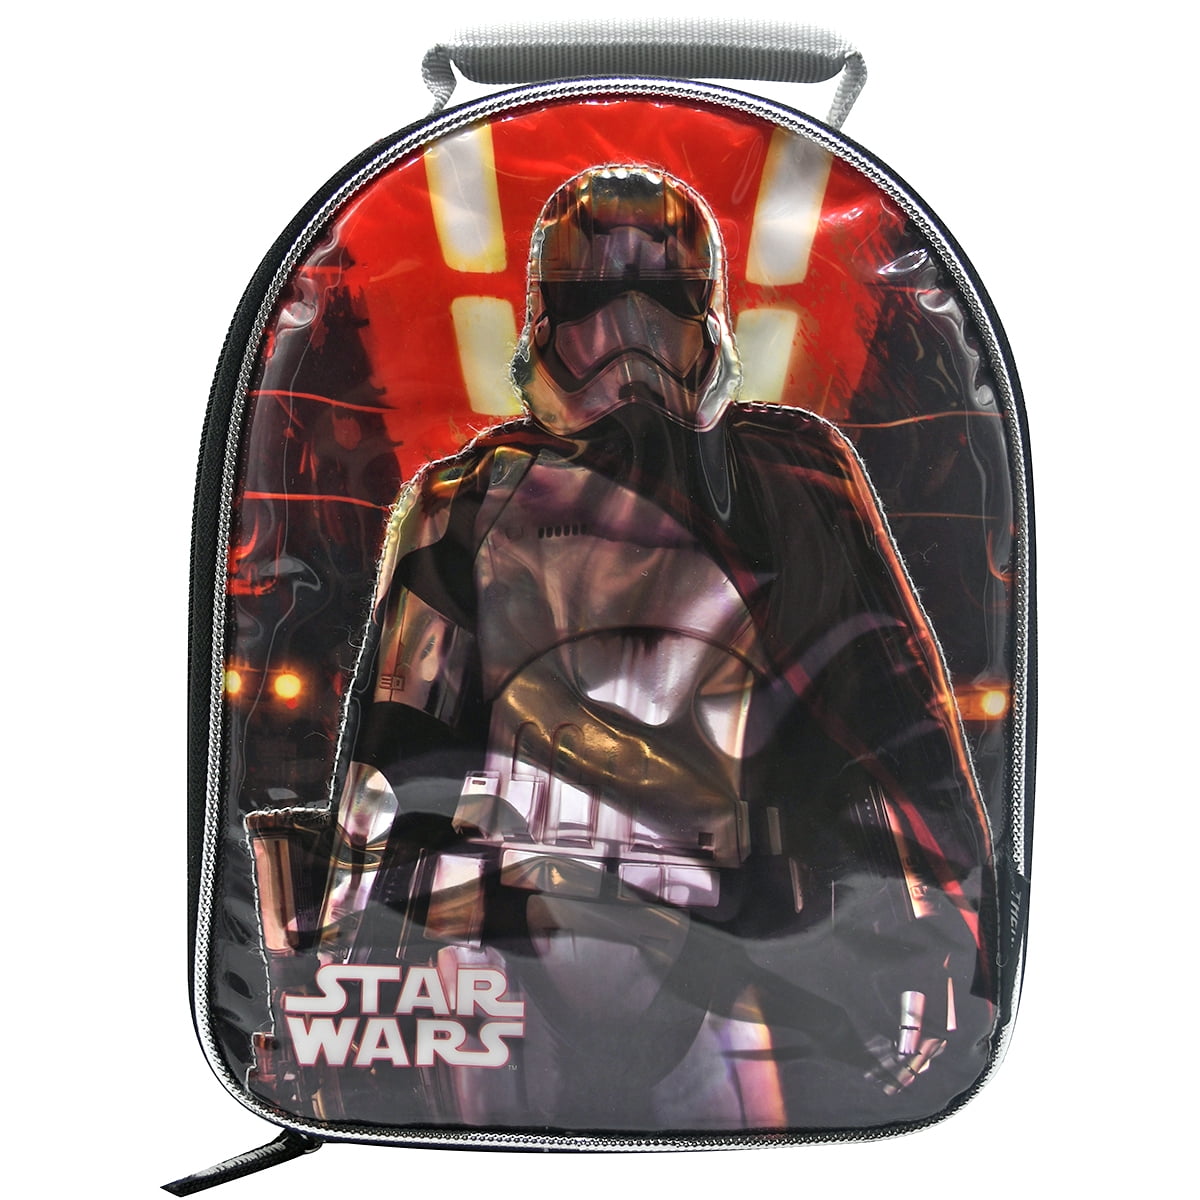 Thermos Dual Compartment Lunch Kit Star Wars Episode VII Kylo Ren NEW 